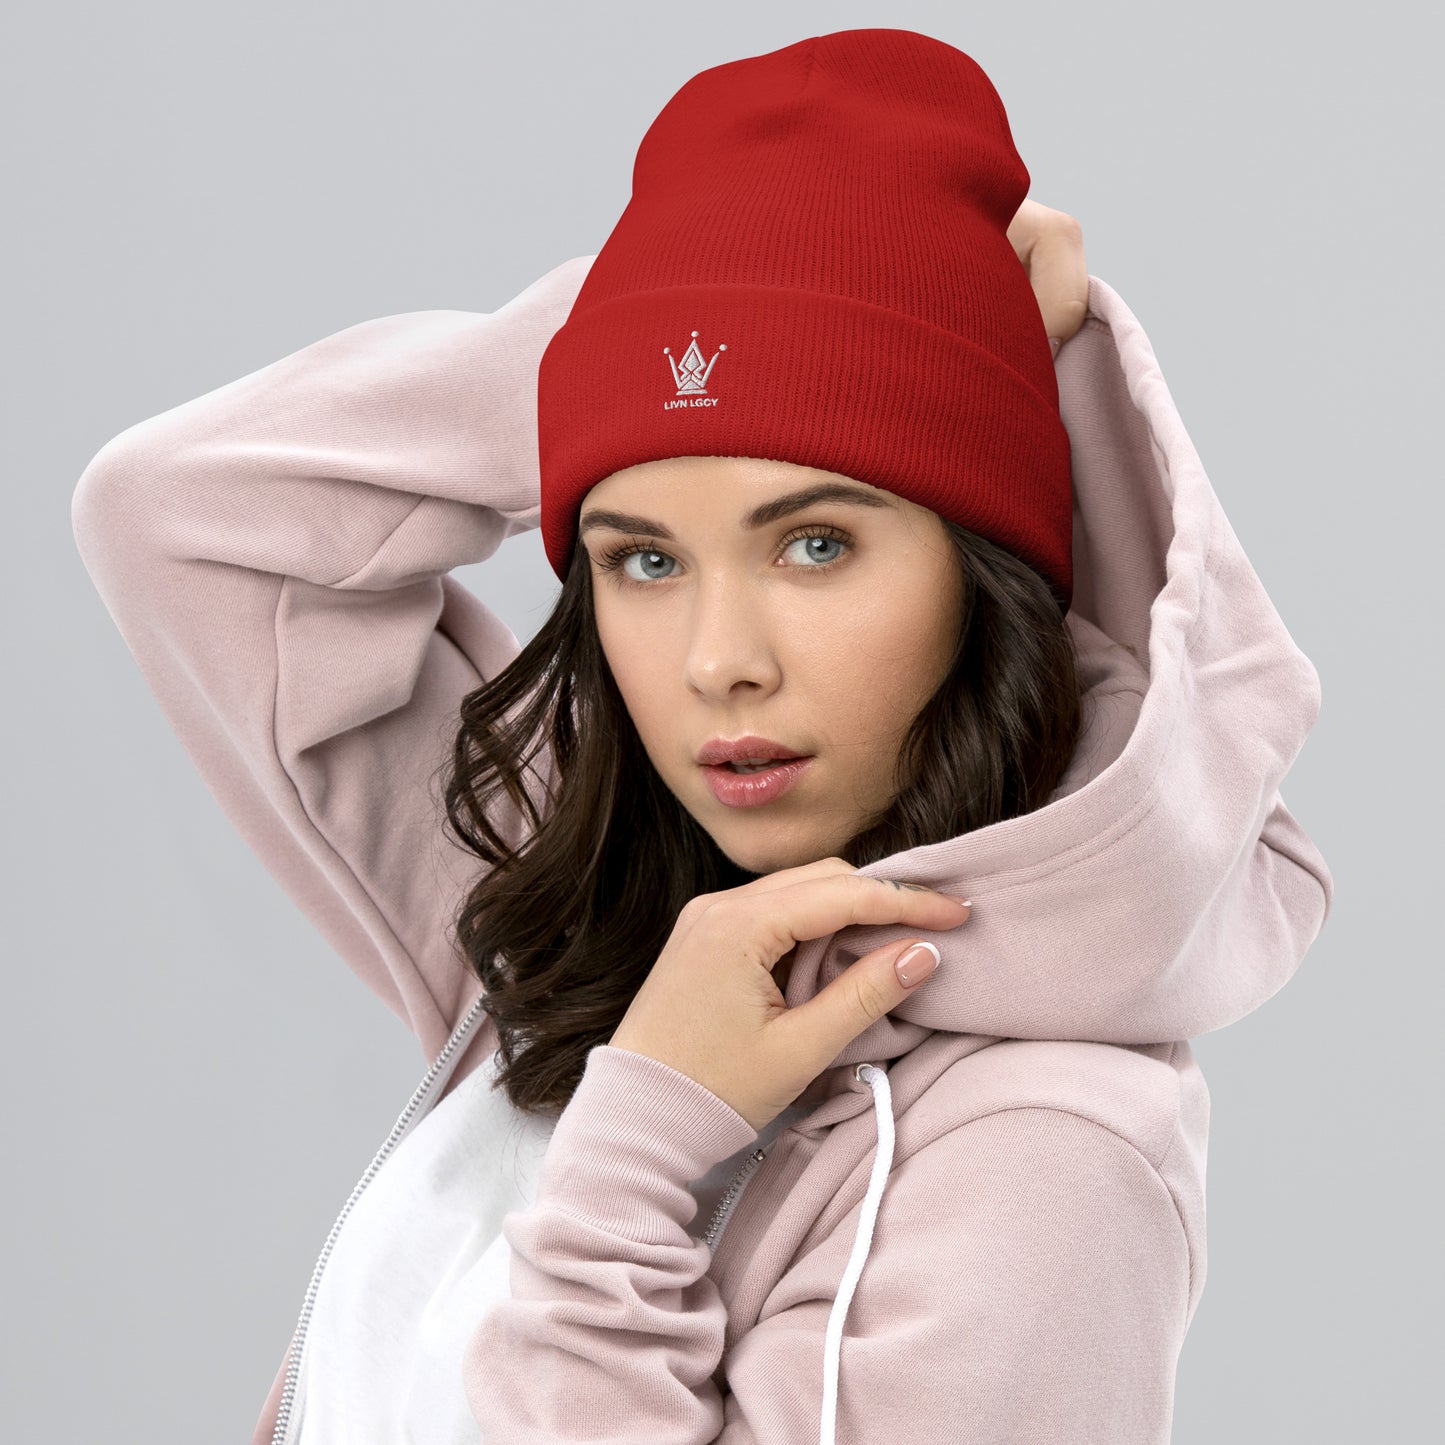 Ruby Red Embroidered Emblem Cuffed Beanie